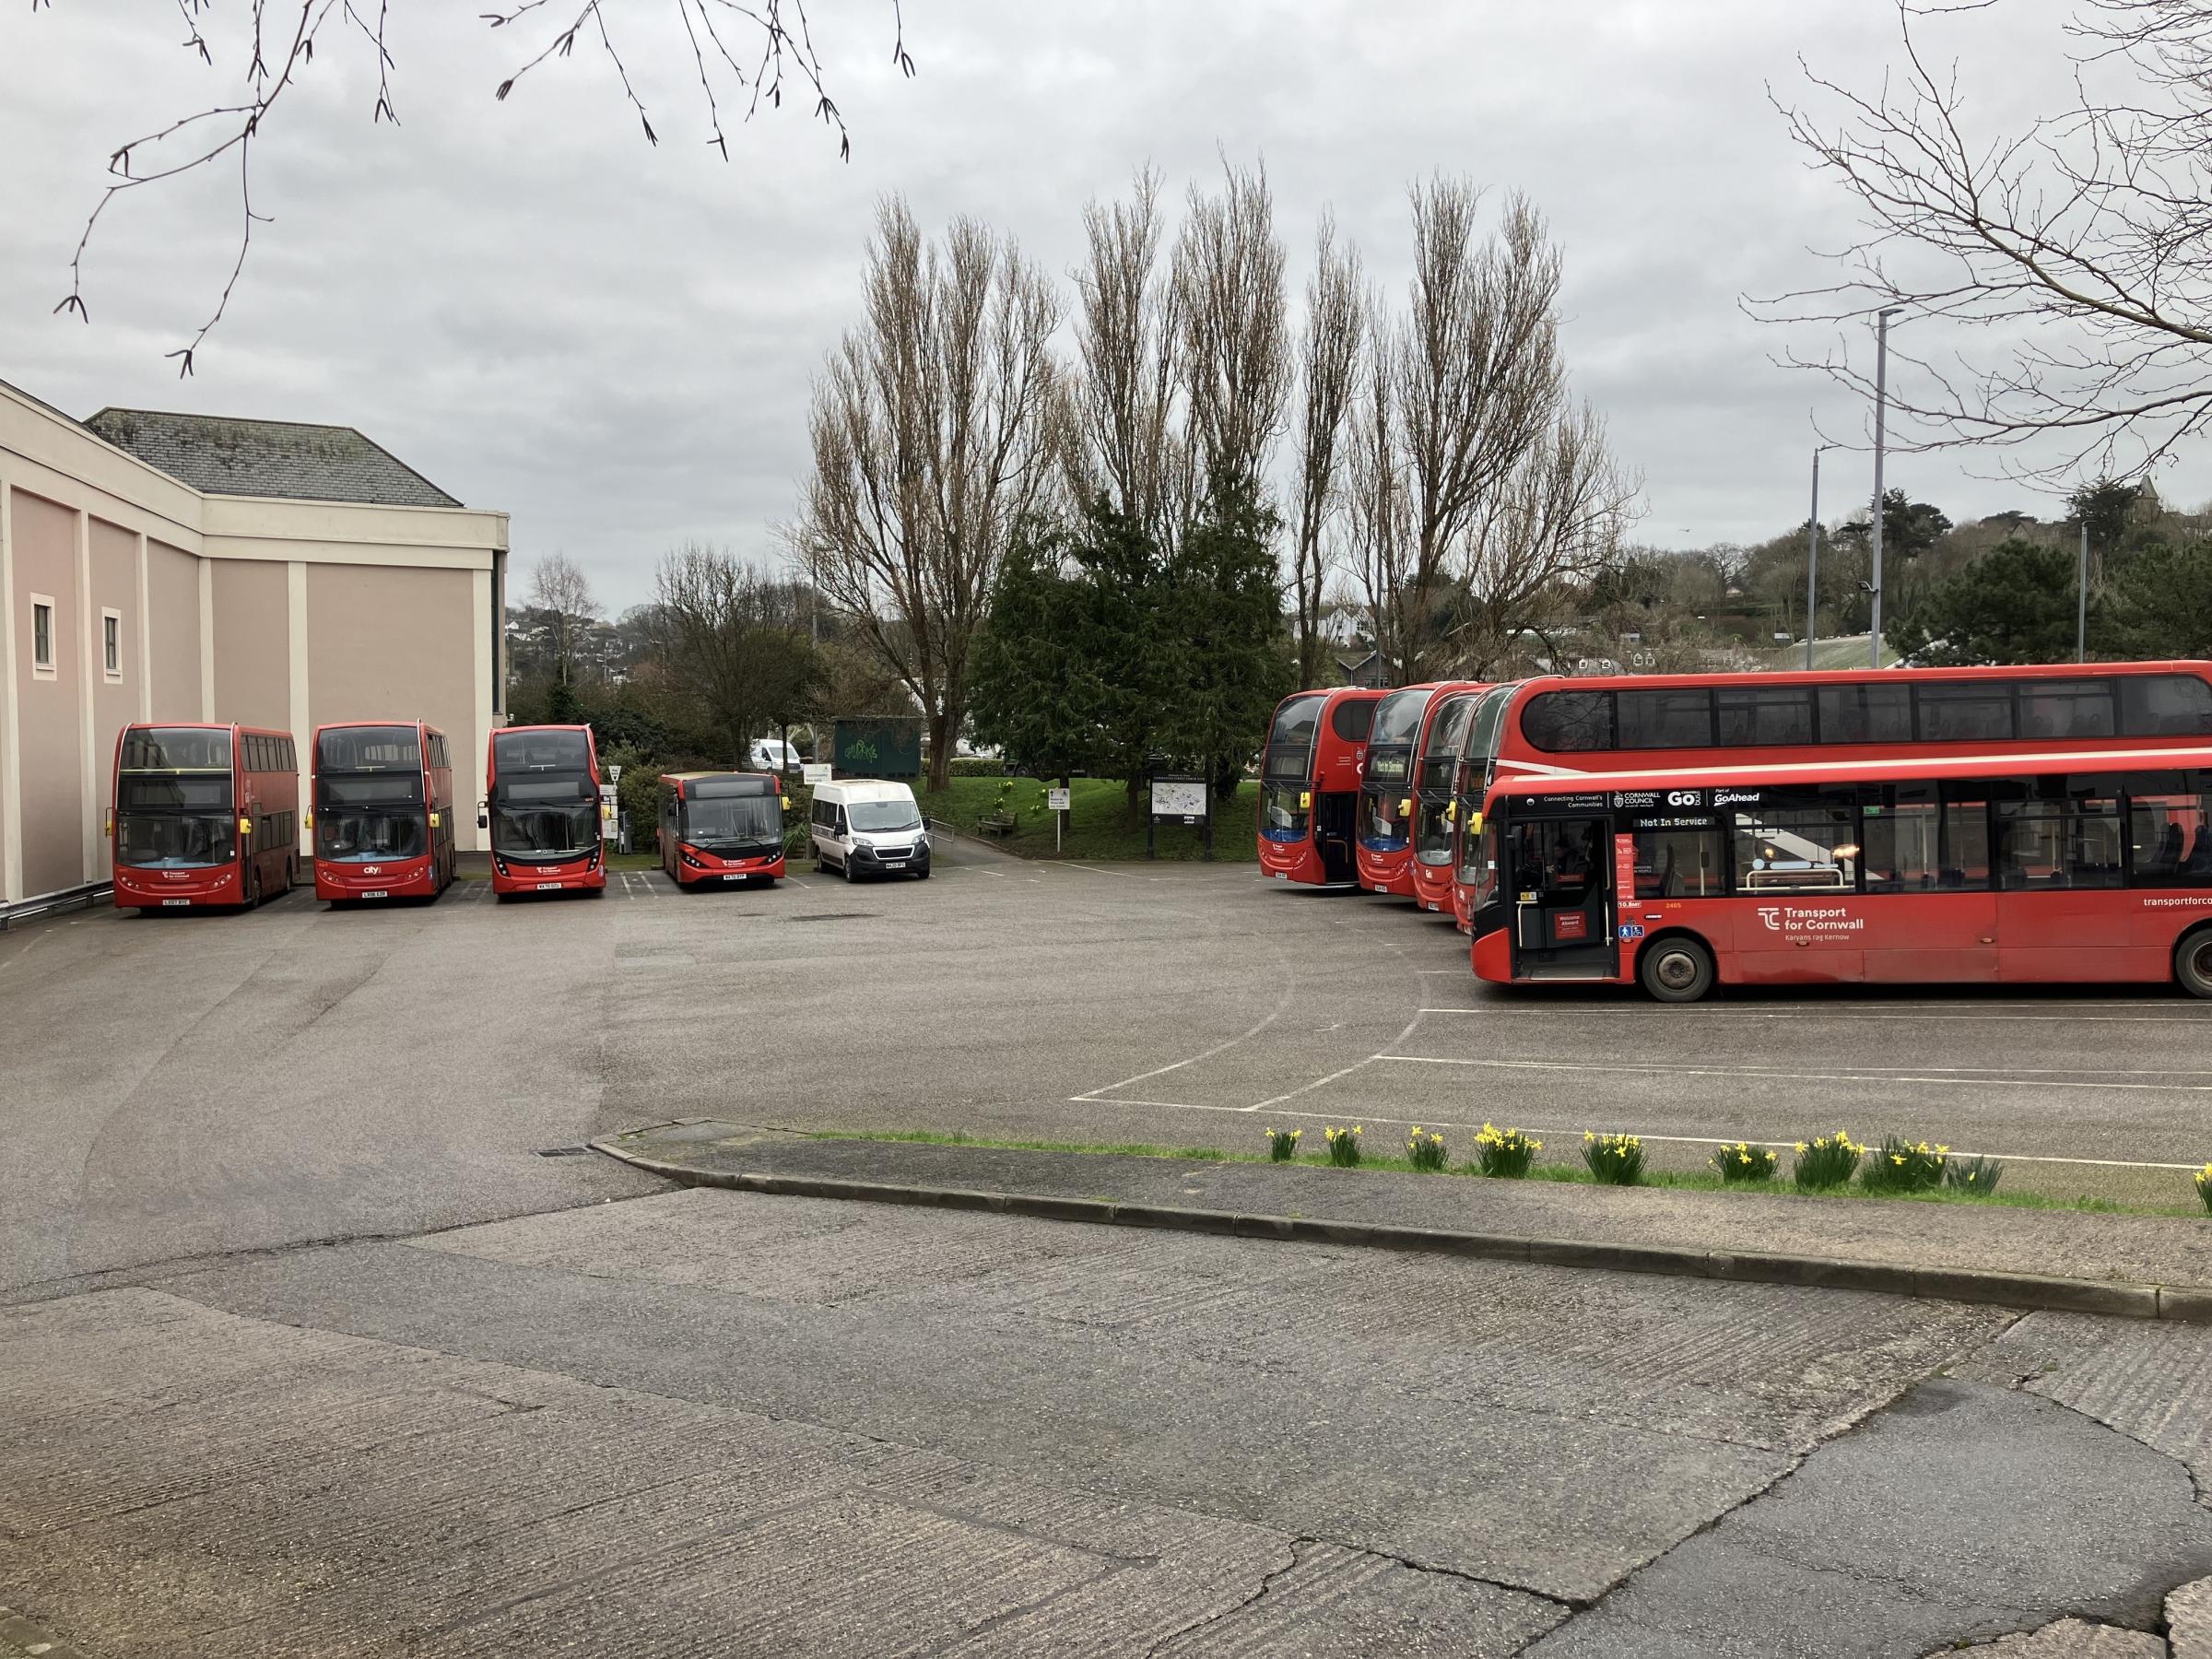 Transport For Cornwall buses using the coach park (Pic: submitted to LDRS)